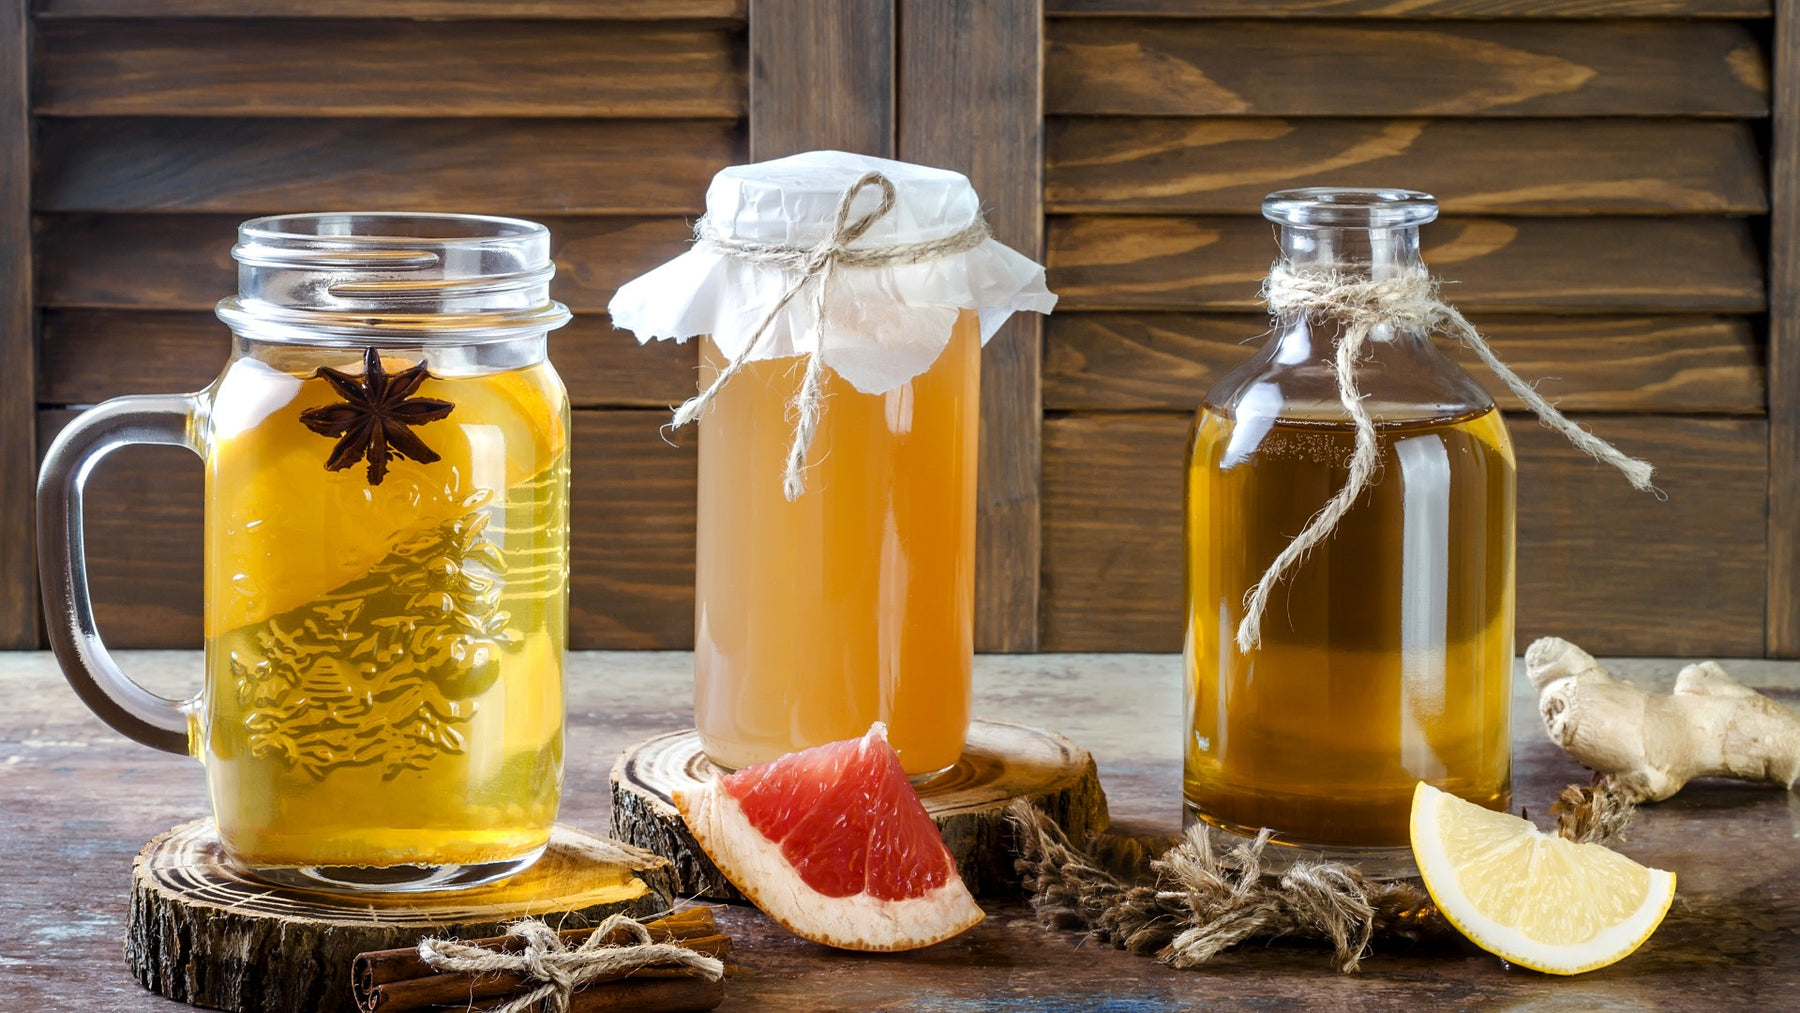 Kombucha - What Is It and Should You Drink It?